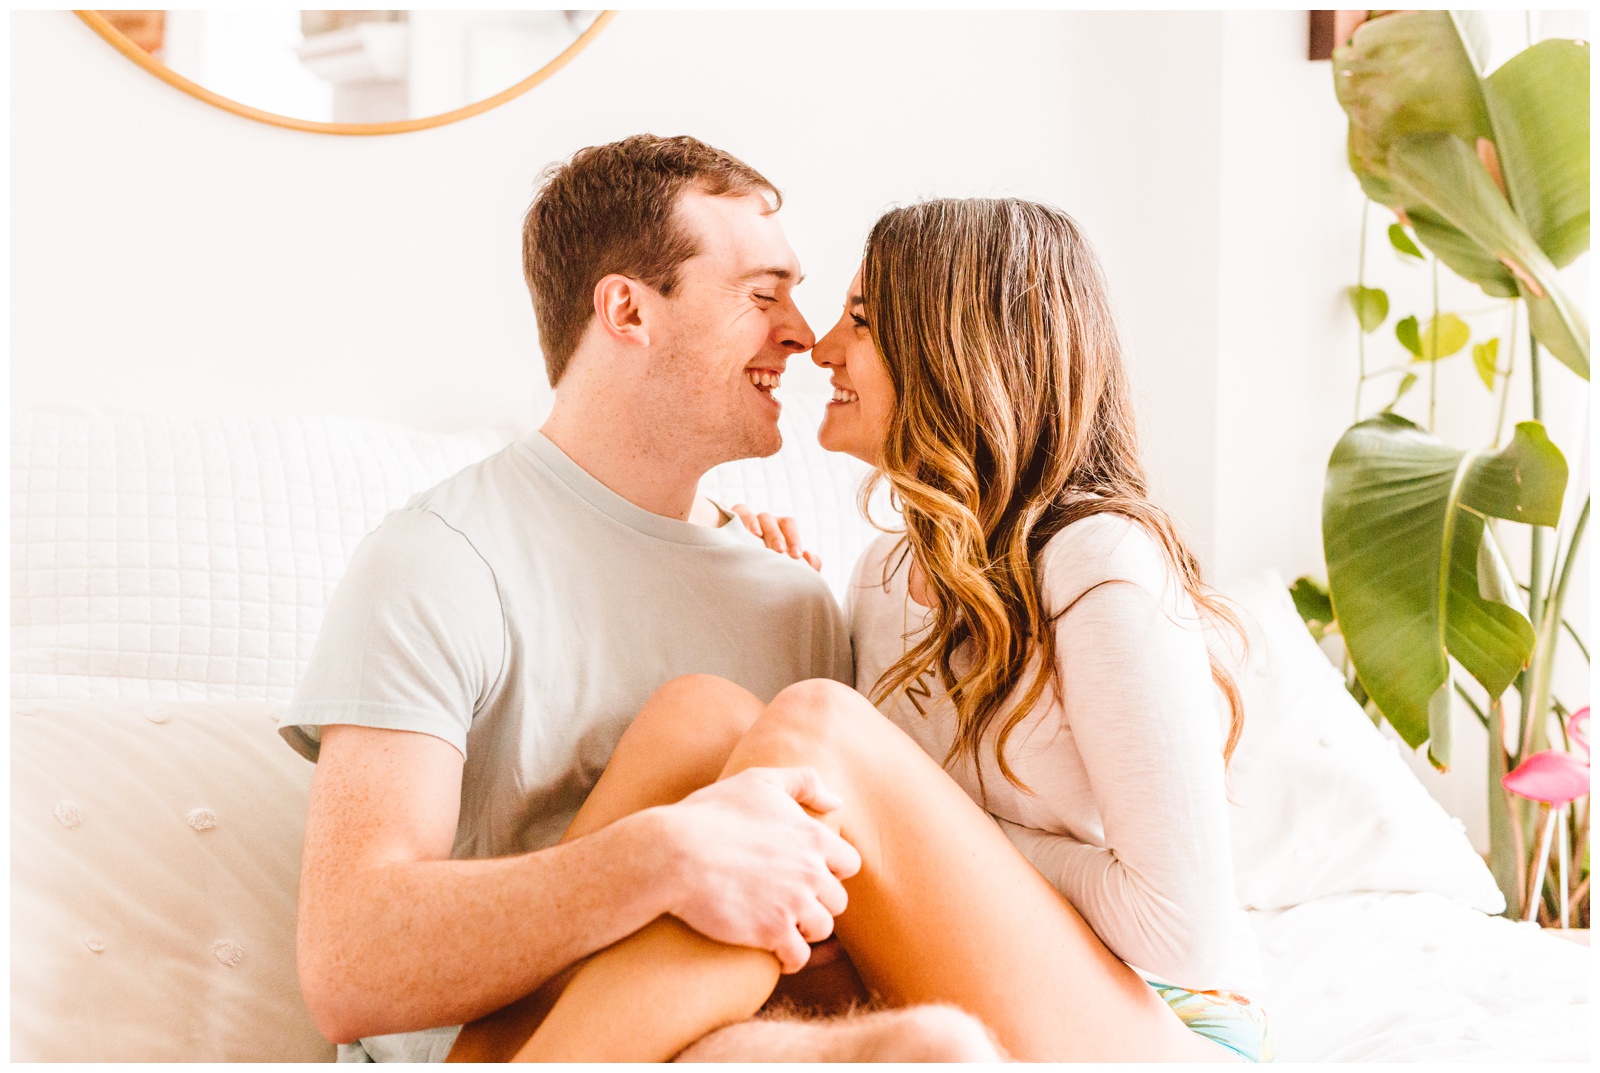 In Home Matching Undies Playful Lifestyle Couples Session - Baltimore, MD - Brooke Michelle Photography